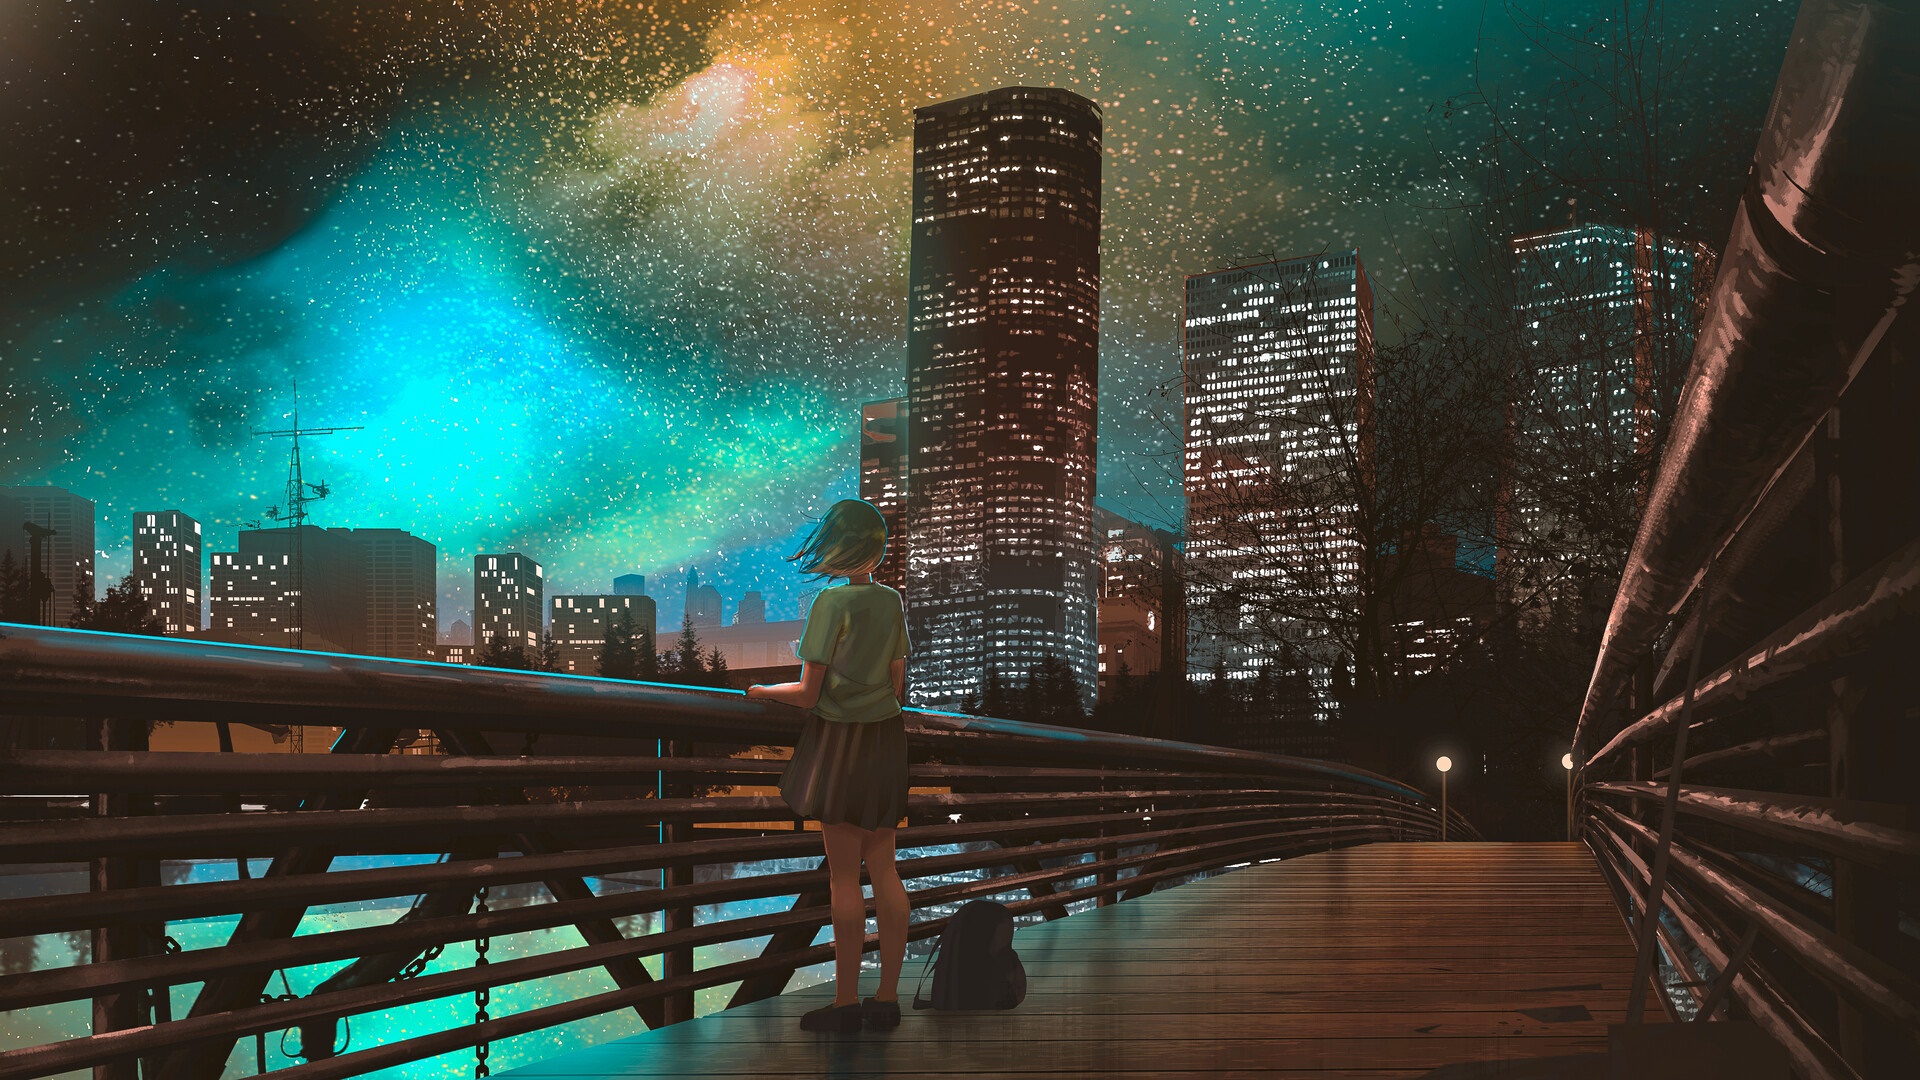 Lone girl in the night  city  anime  art wallpaper backiee